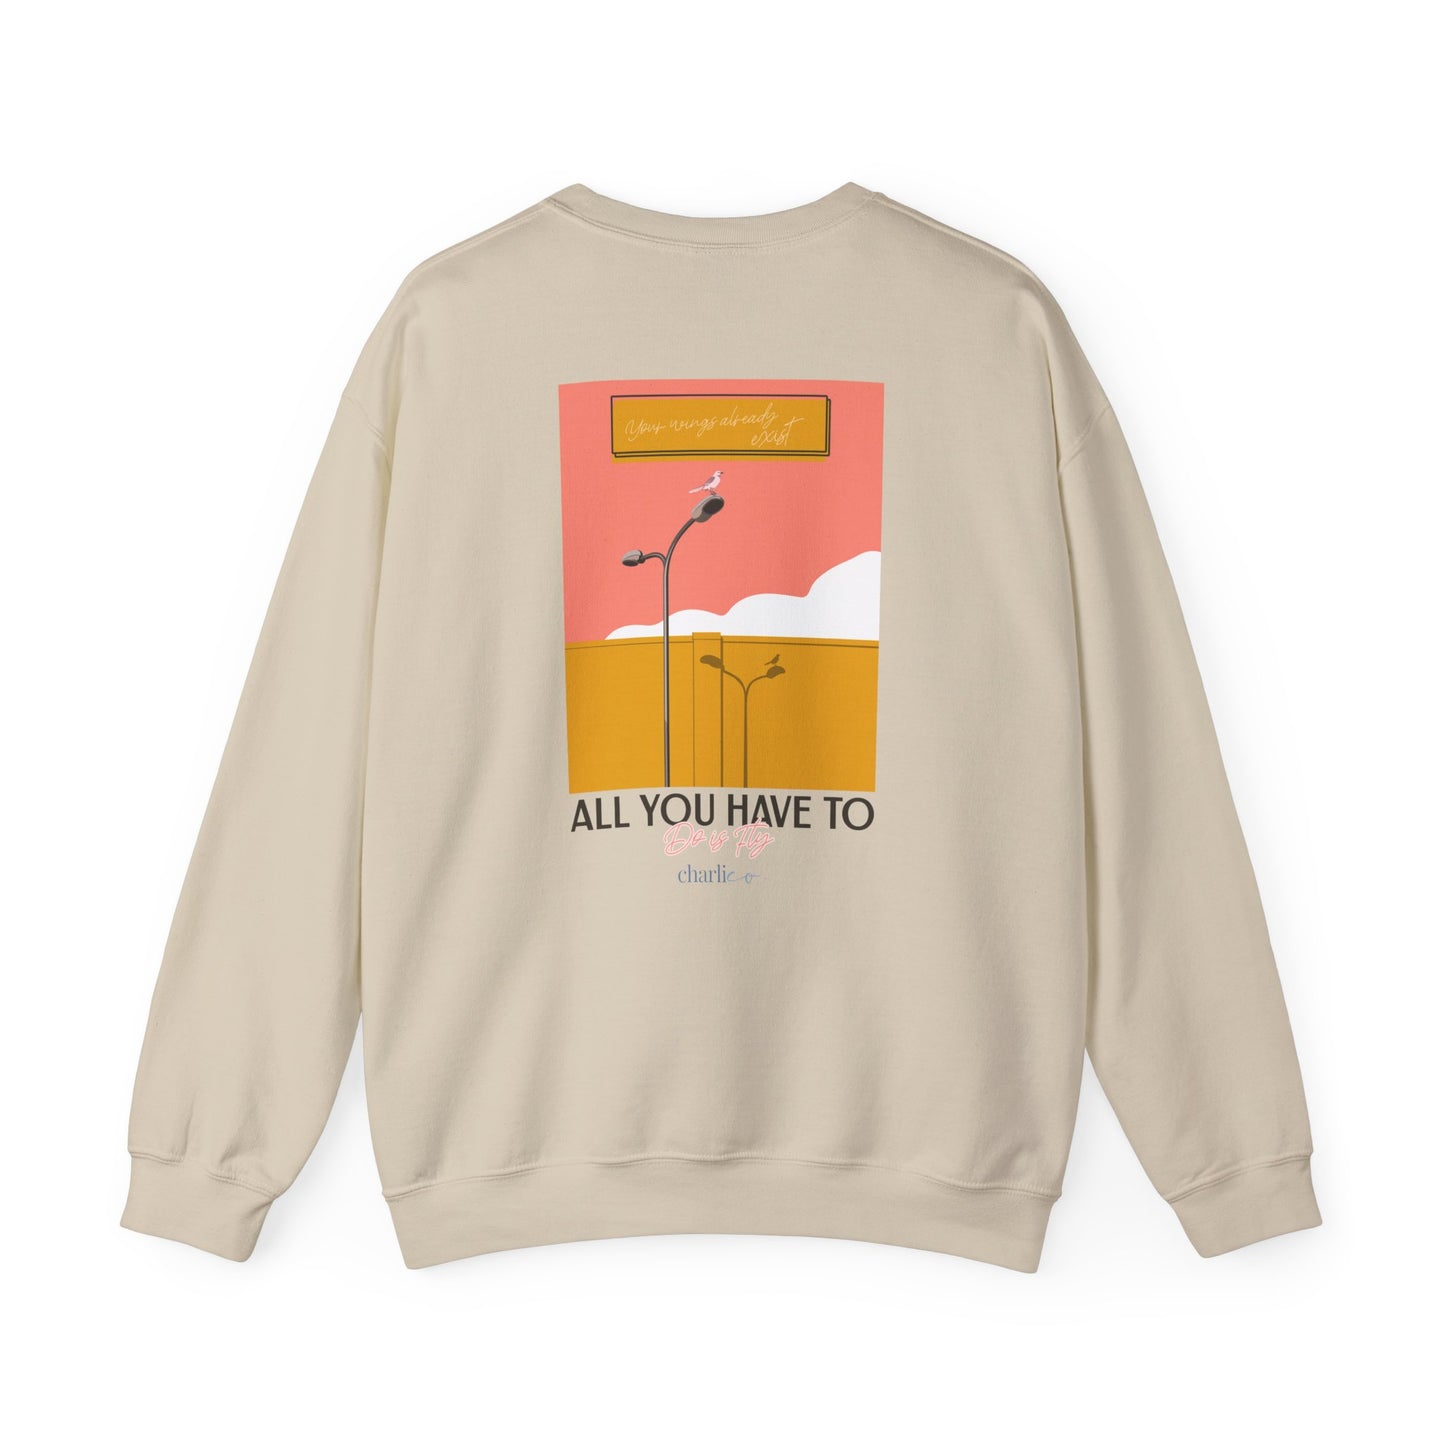 Crewneck sweatshirt -all you have to do is FLY- for adults